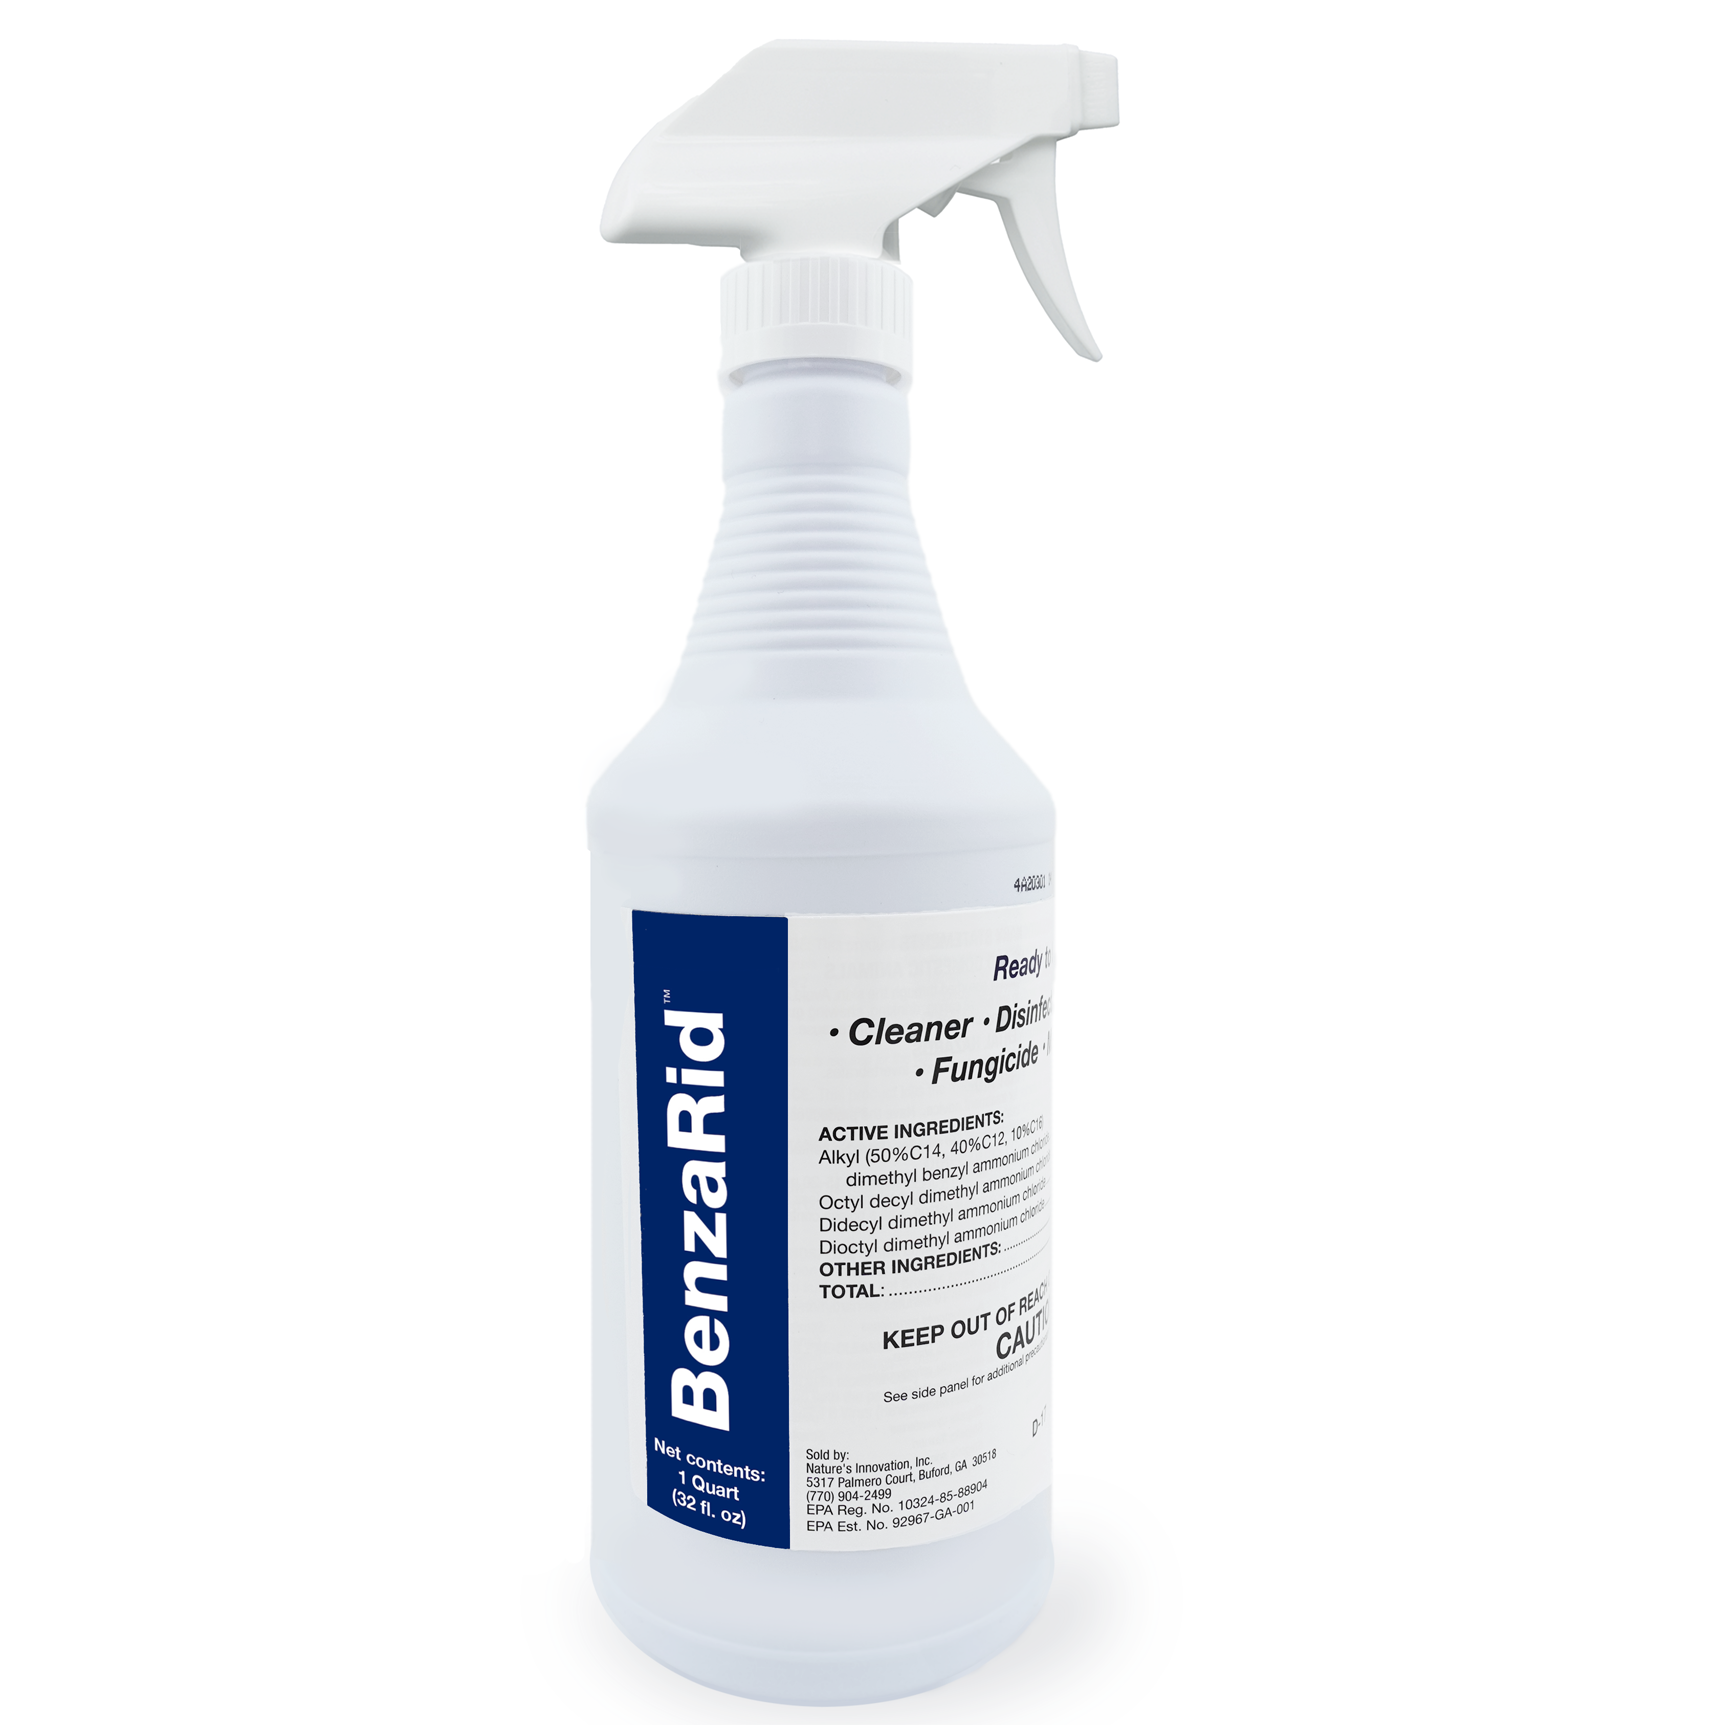 Buy Germ Clear™ Bird Droppings Disinfectant Cleaning Spray